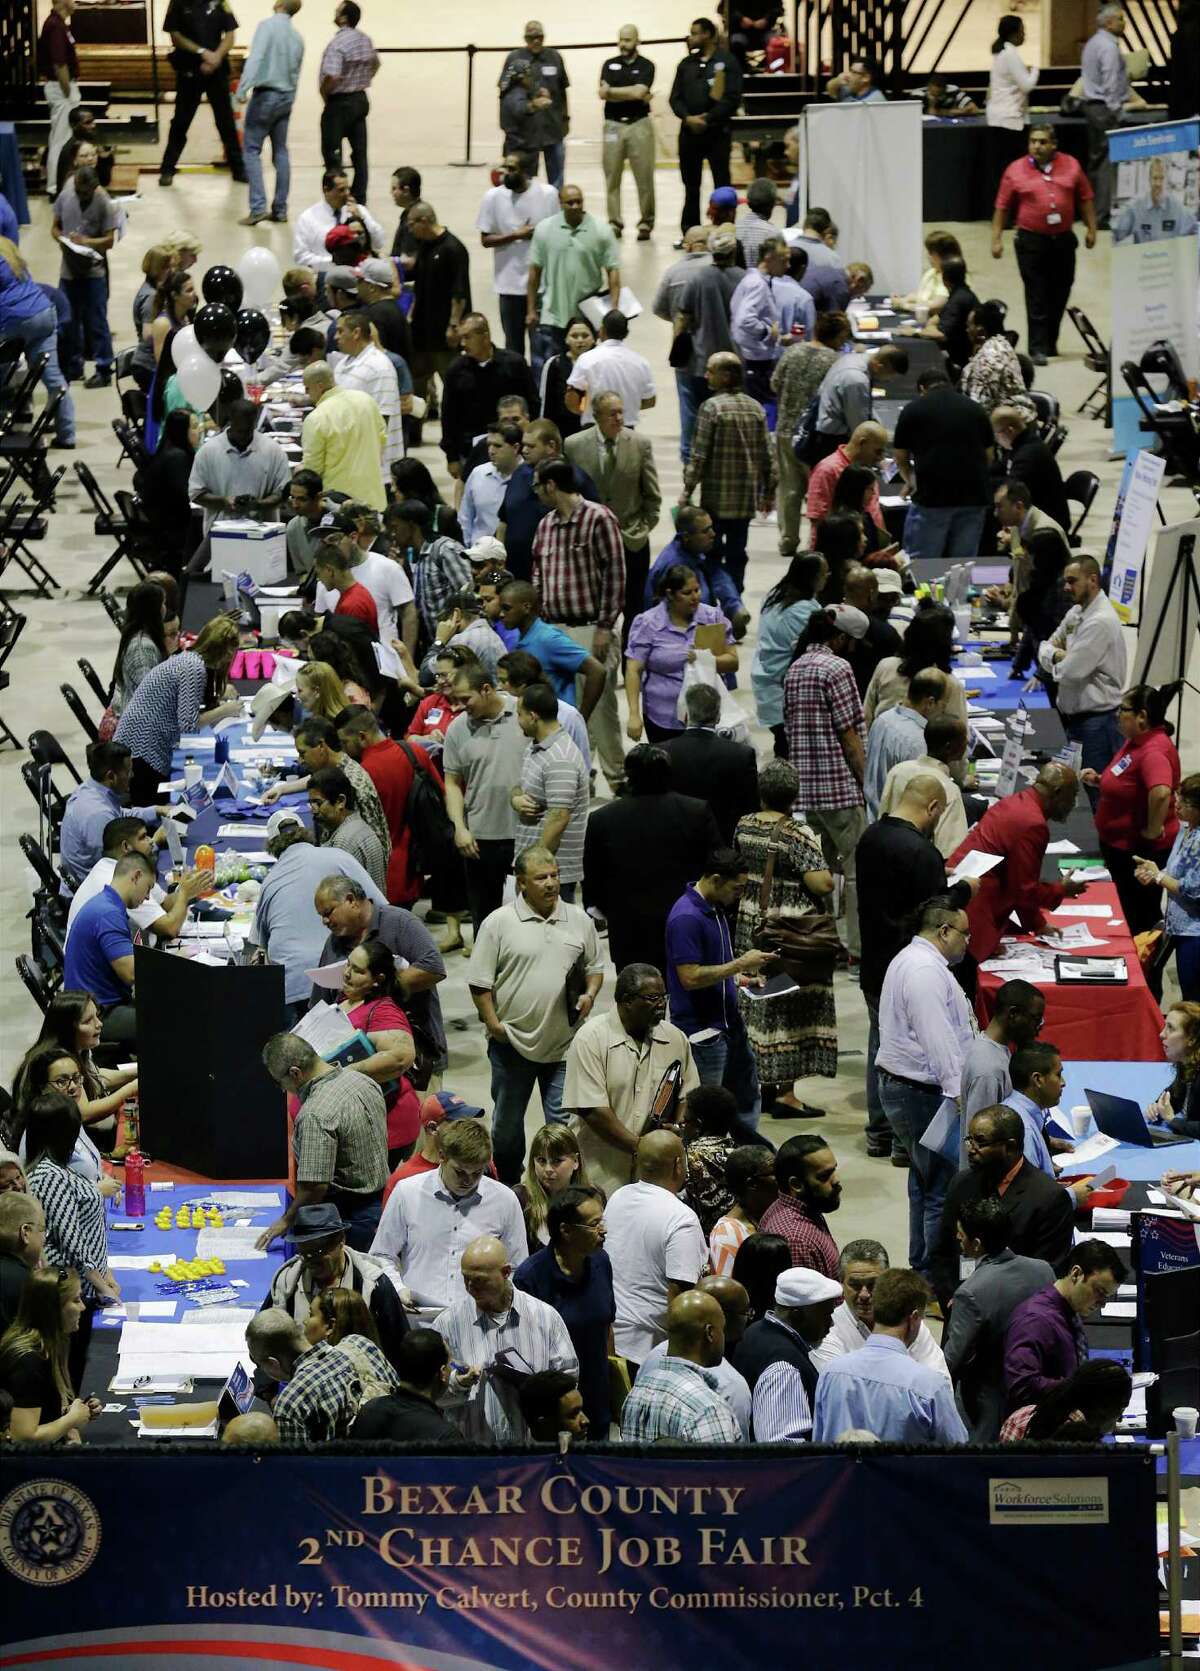 A crowd of applicants slowly make their way from table to table in search of job opportunities at the 2nd Chance Job Fair hosted by Bexar County Commissioner Tommy Calvert on Thursday at the AT&T Center.